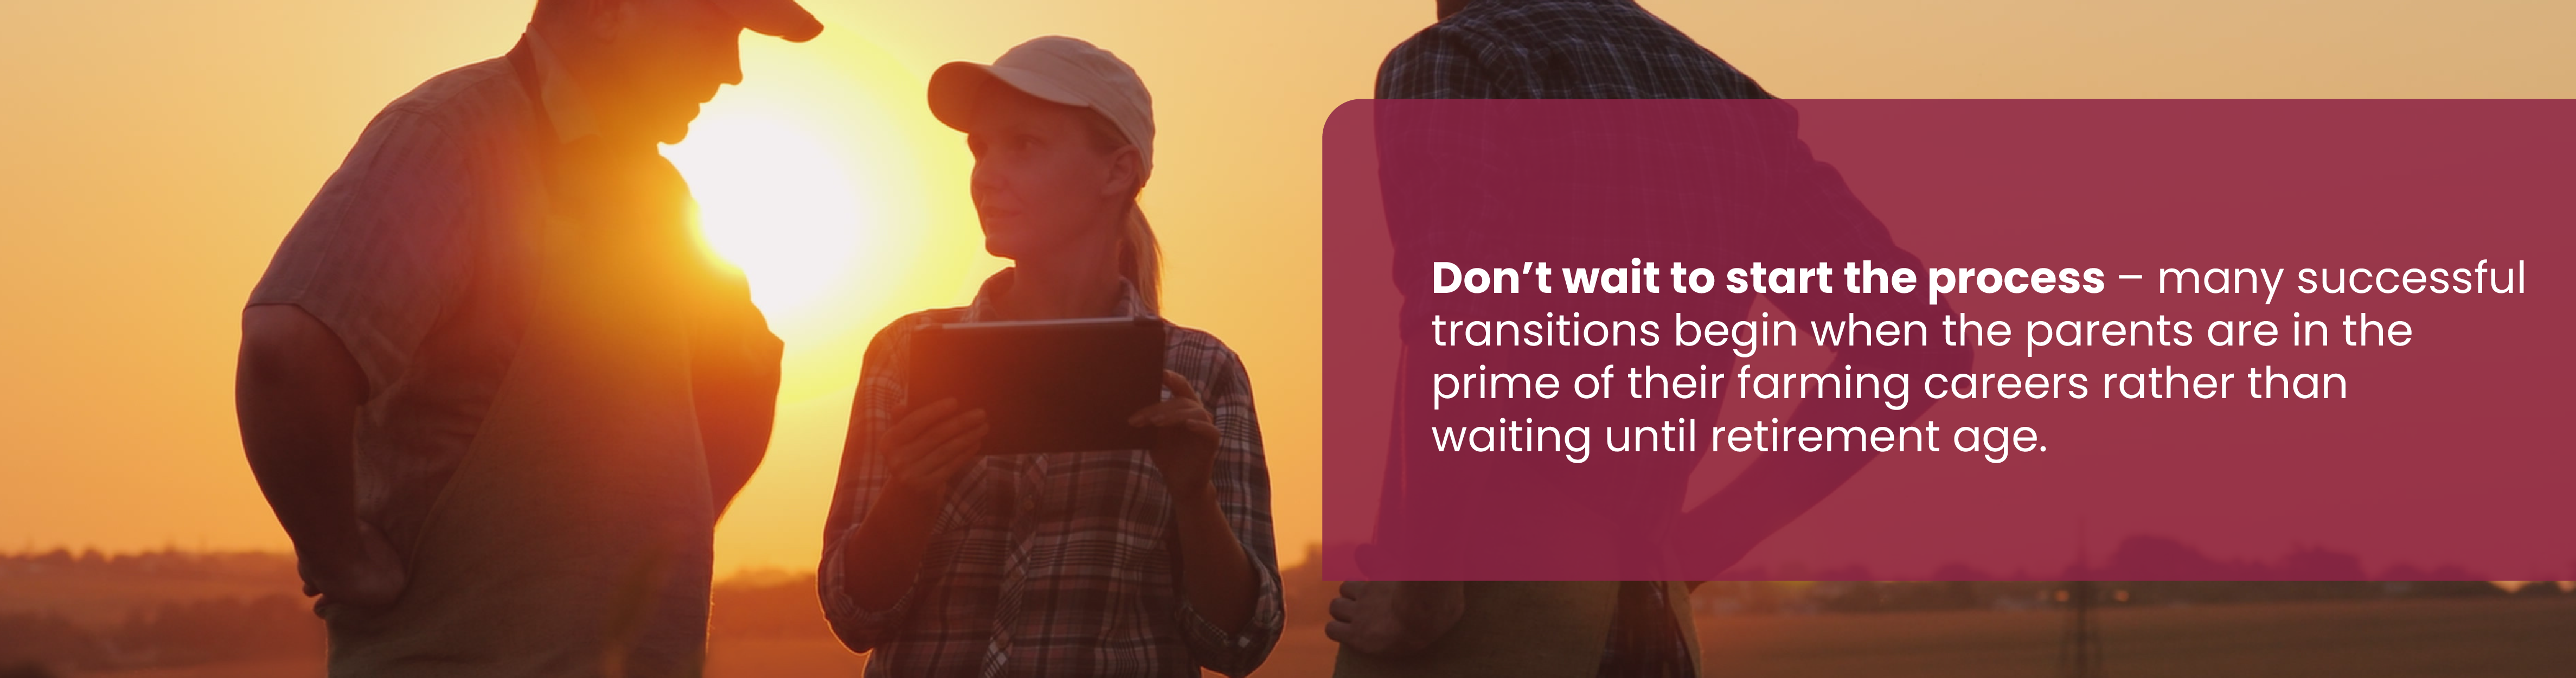 3 people talking. Text: Don't wait to start the process - many successful transitions begin when the parents are in the prime of their farming careers rather than waiting until retirement age.